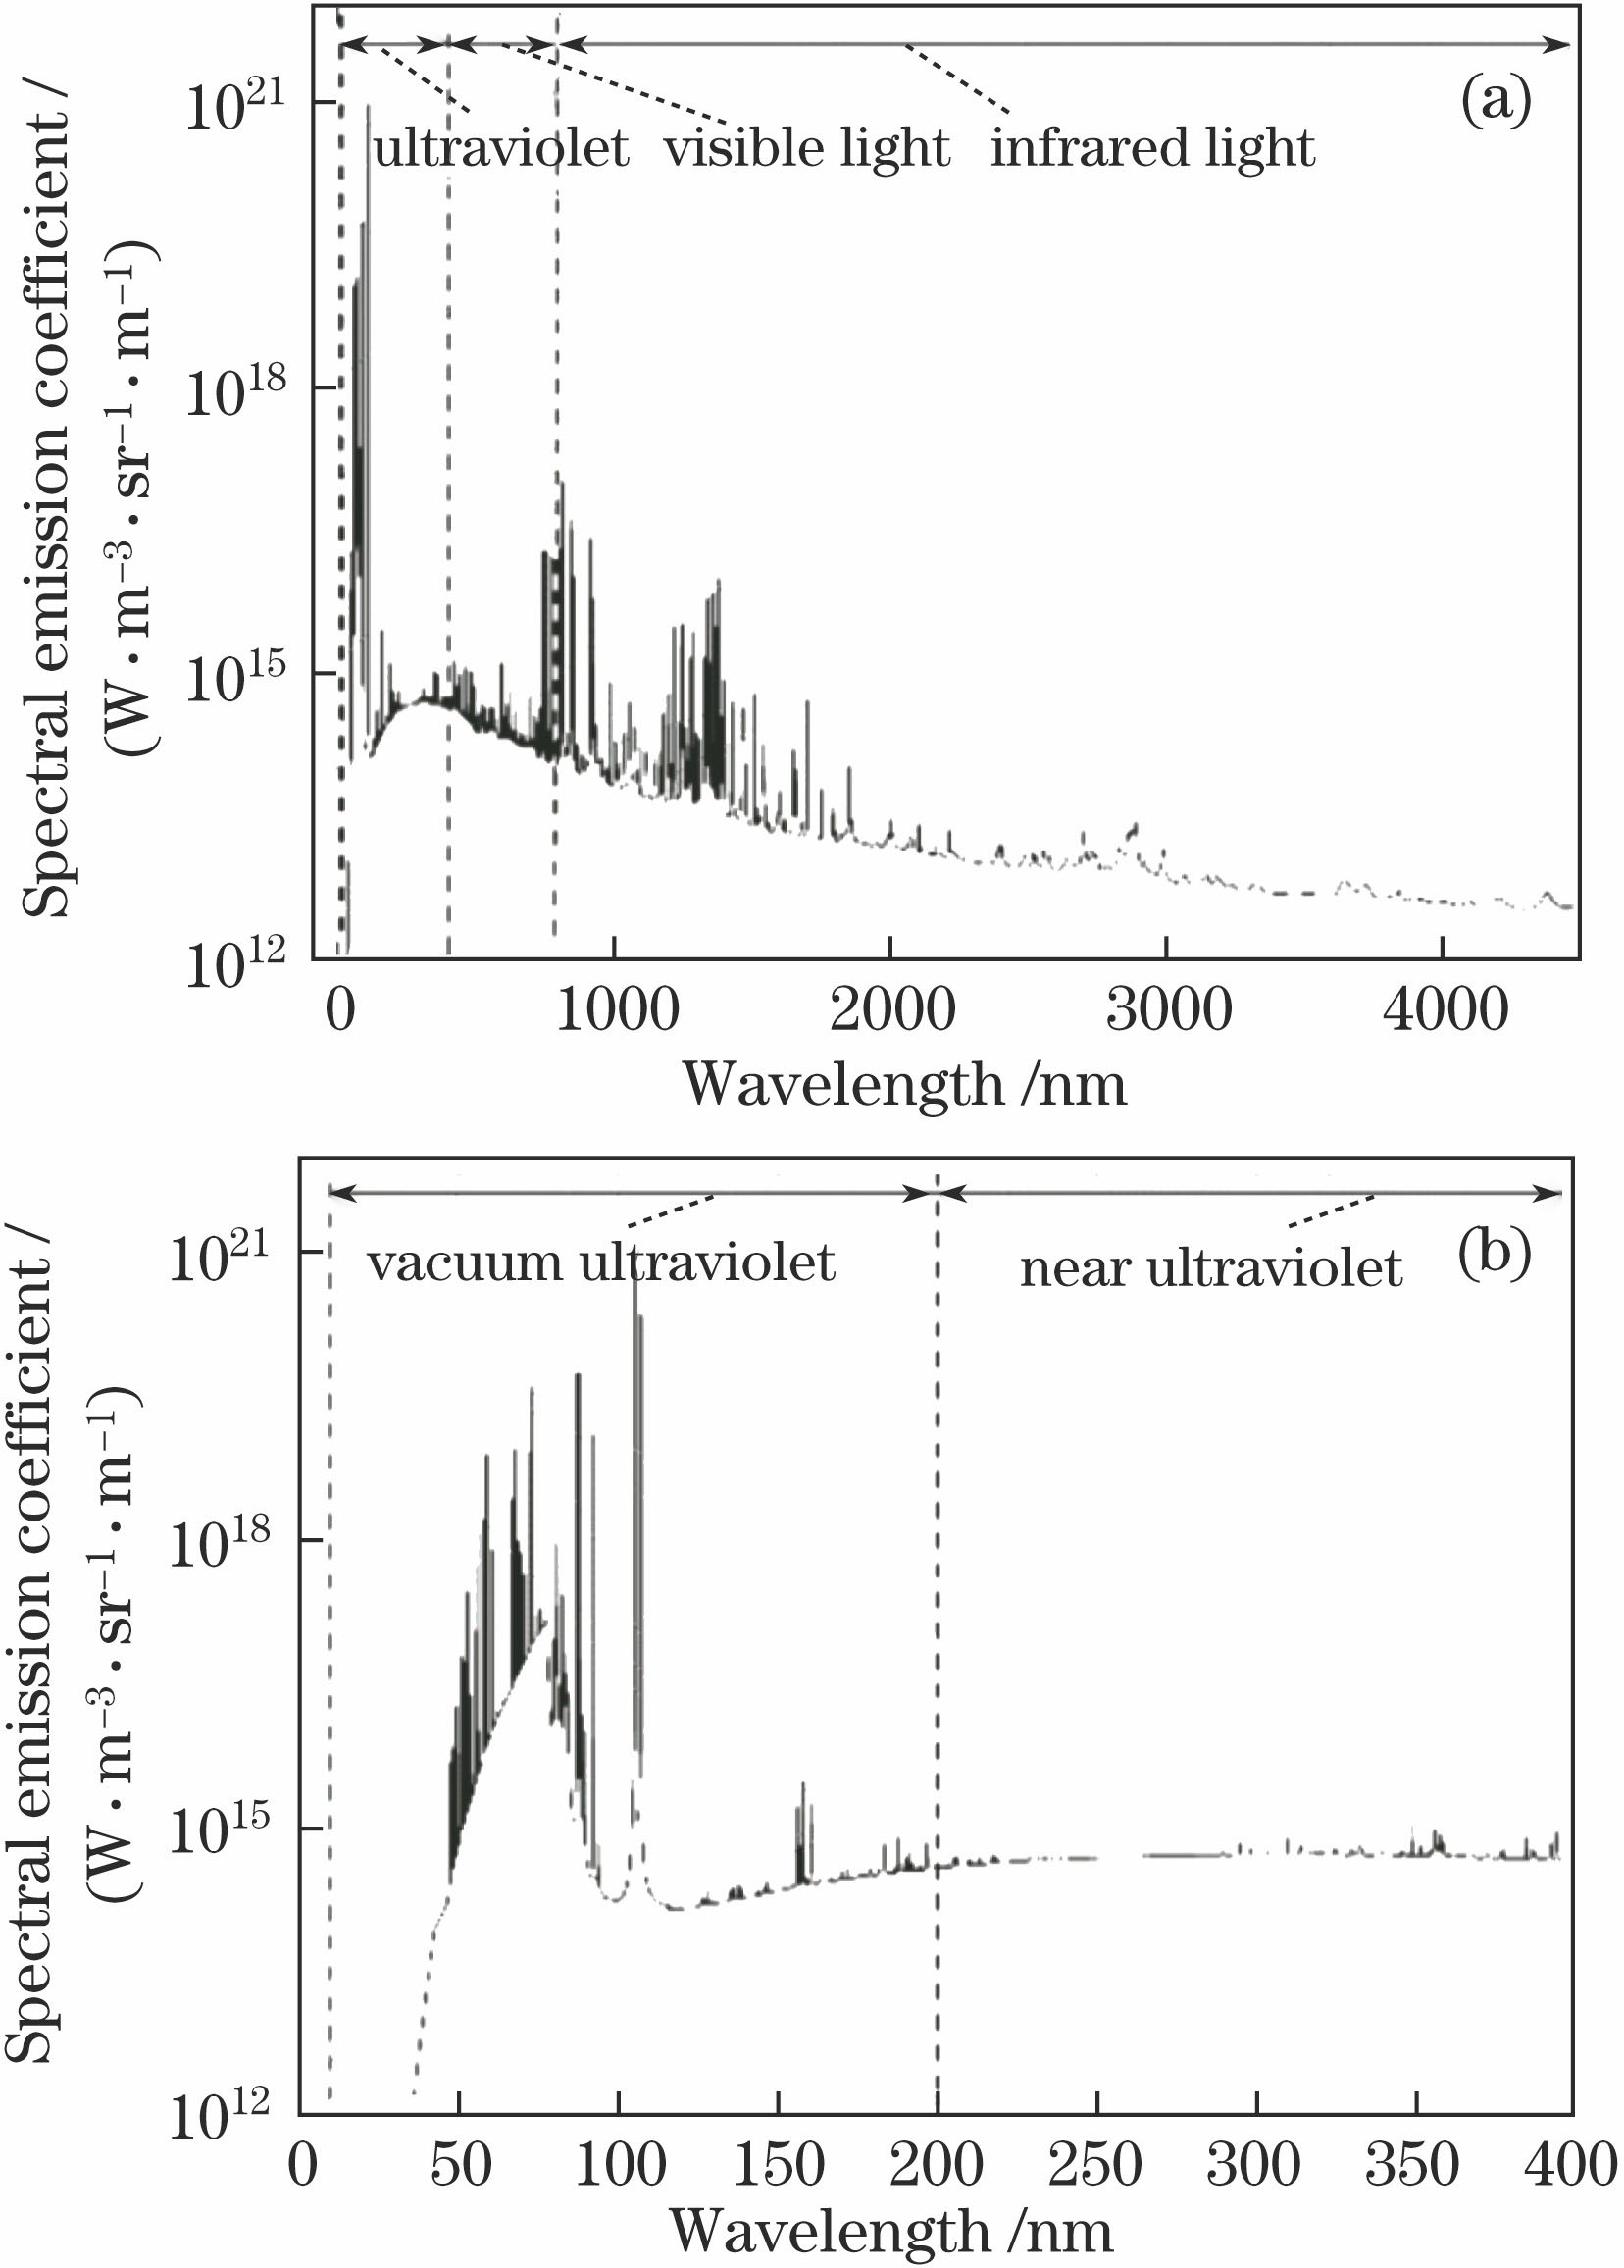 Spectral distributions of argon plasmas at 0.1 MPa and 15000 K (without self-absorption). (a) Entire spectrum; (b) ultraviolet spectrum